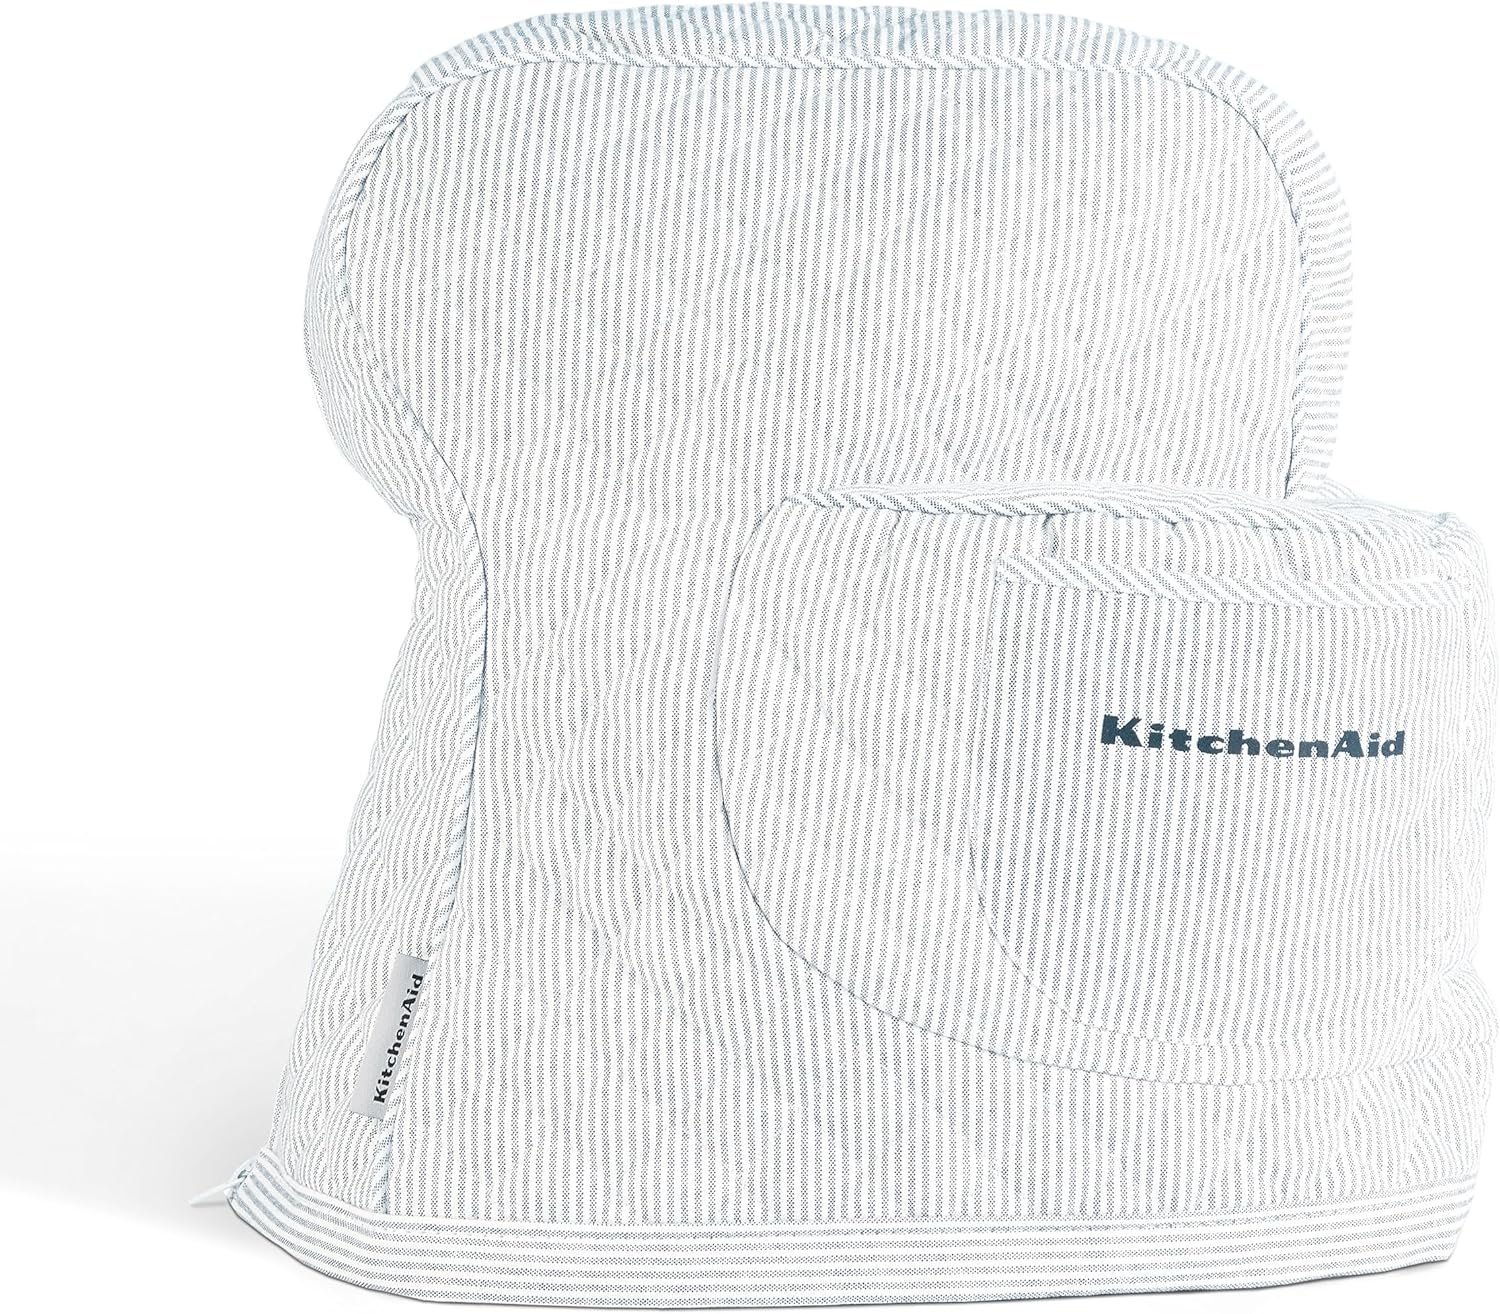 Kitchenaid Quilted 100% Cotton Tilt Head Blender Cover With Storage BAG - 14.5 \ "X 18 \" X 10 \ " - Ink Blue